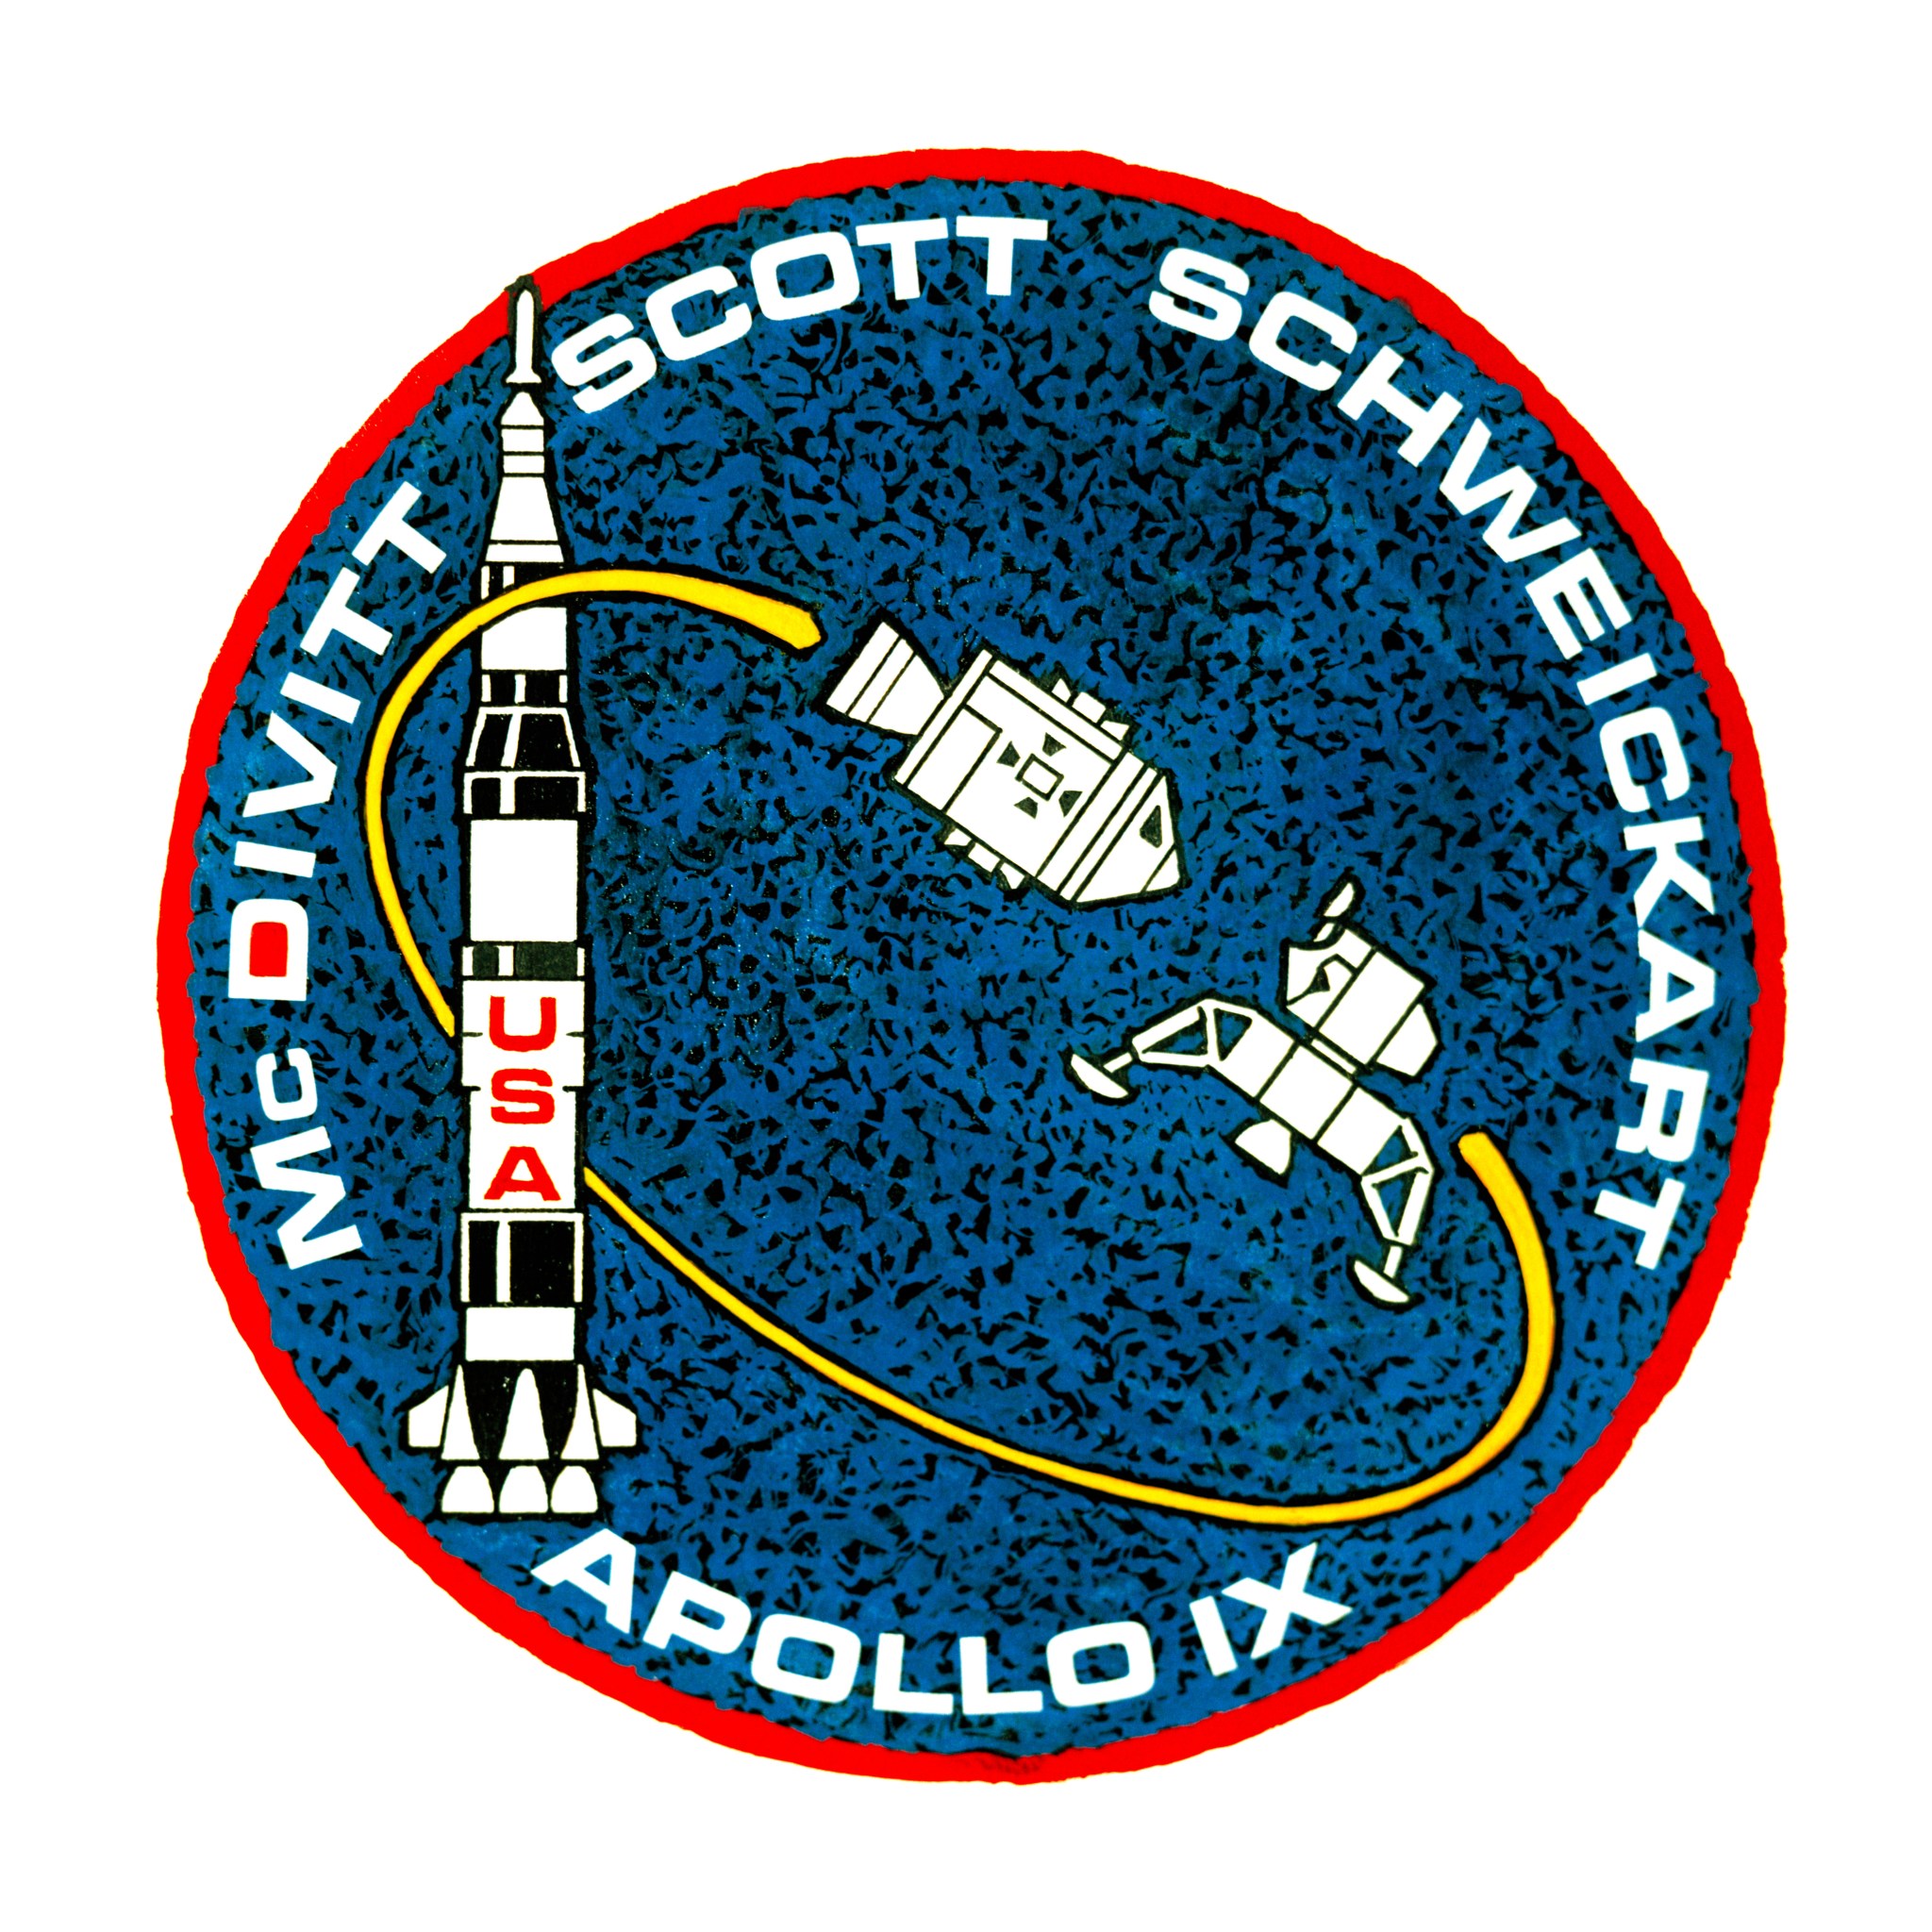 Apollo 9 official mission patch